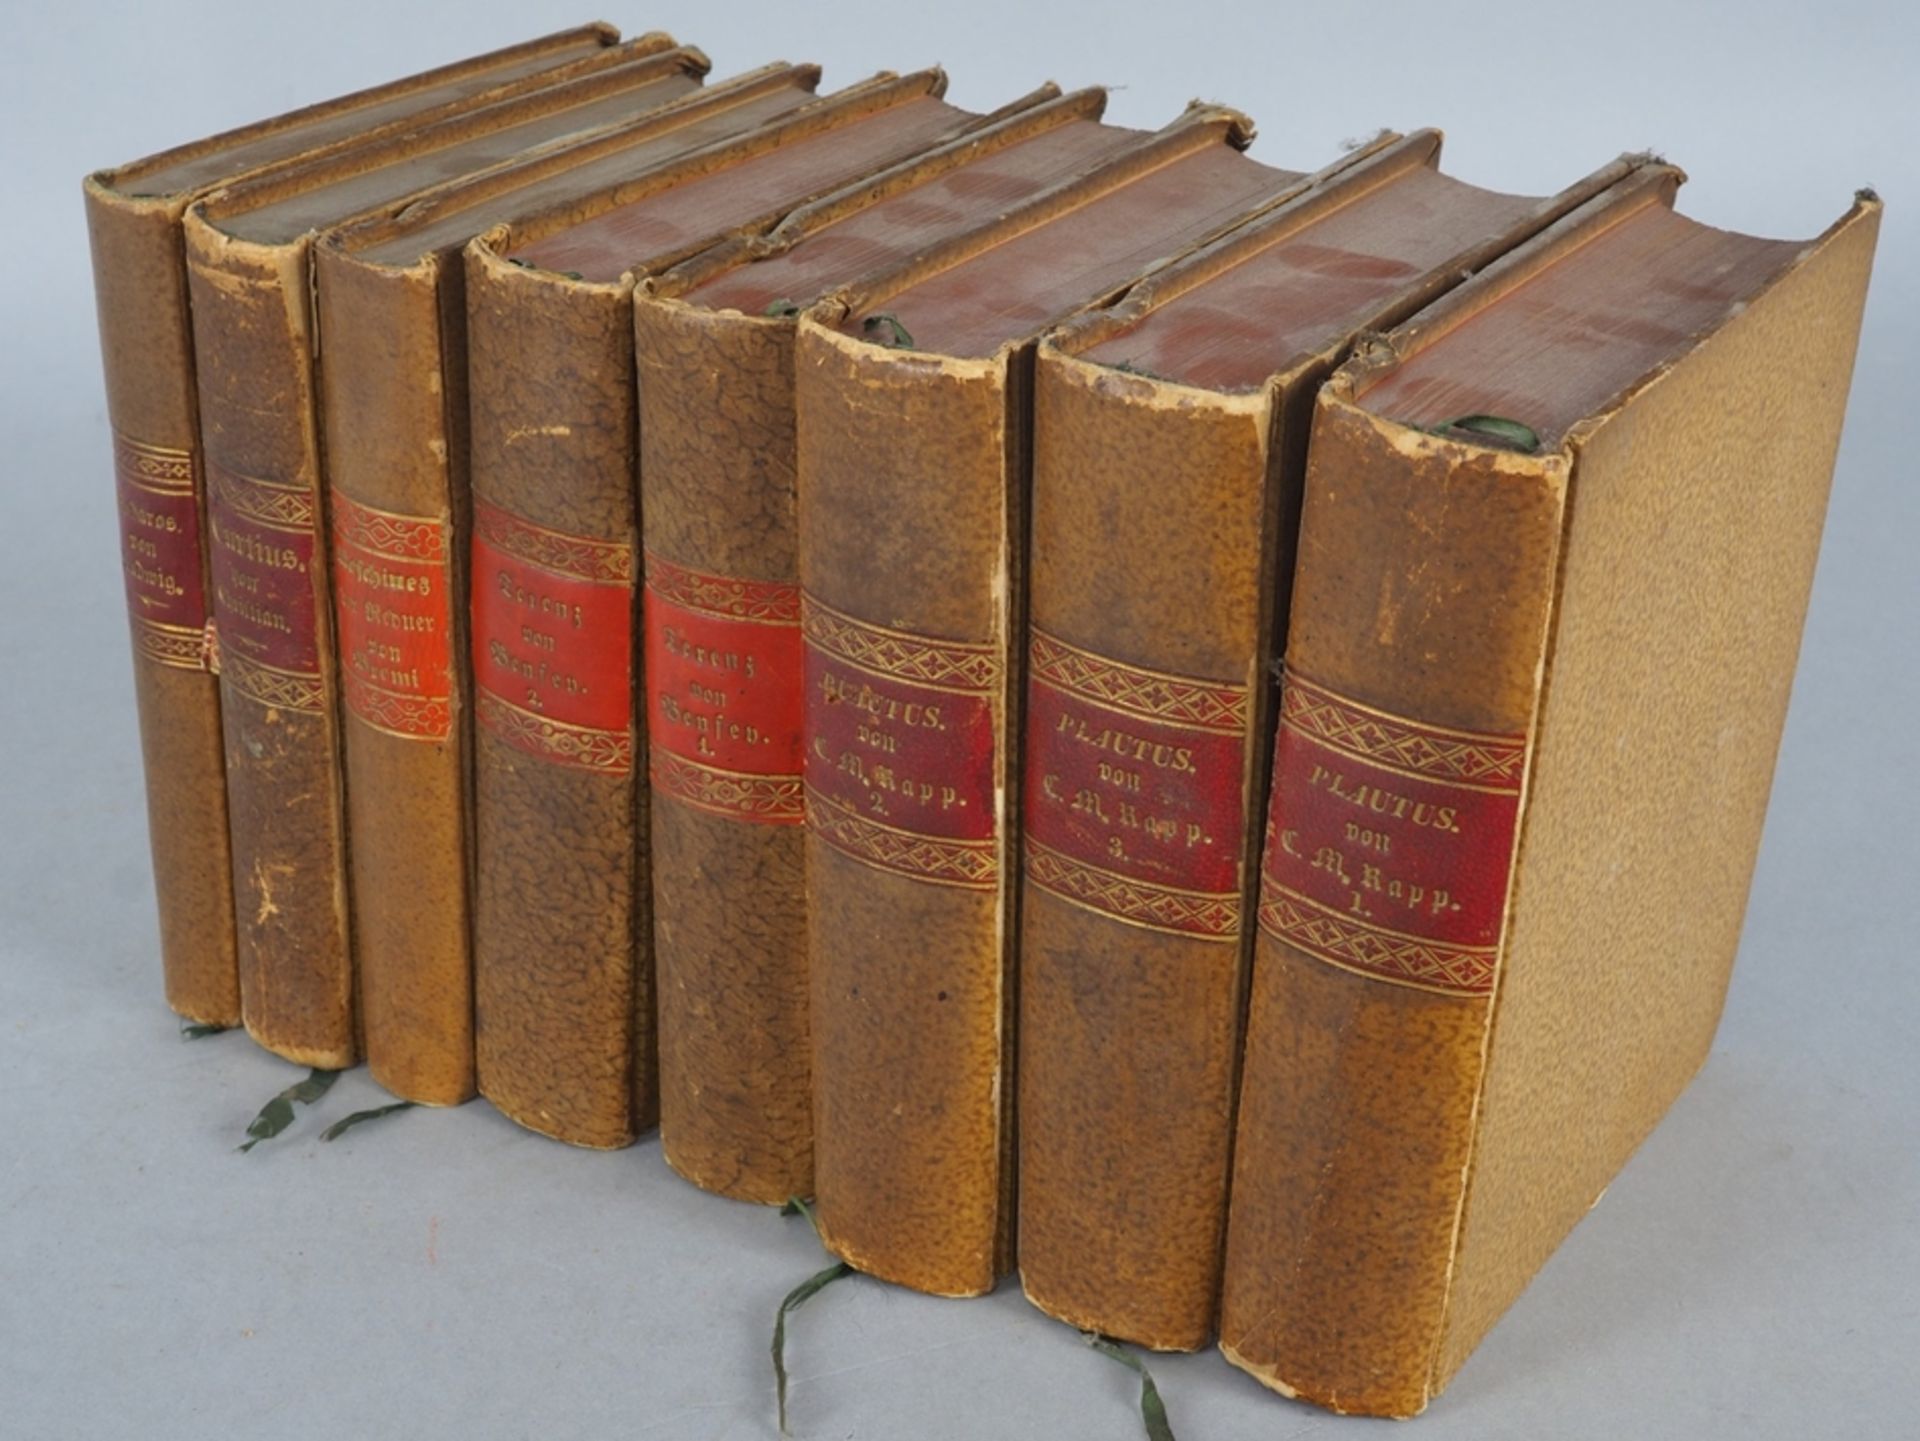 Collection of books by ancient poets, 19th c., 8 vols.